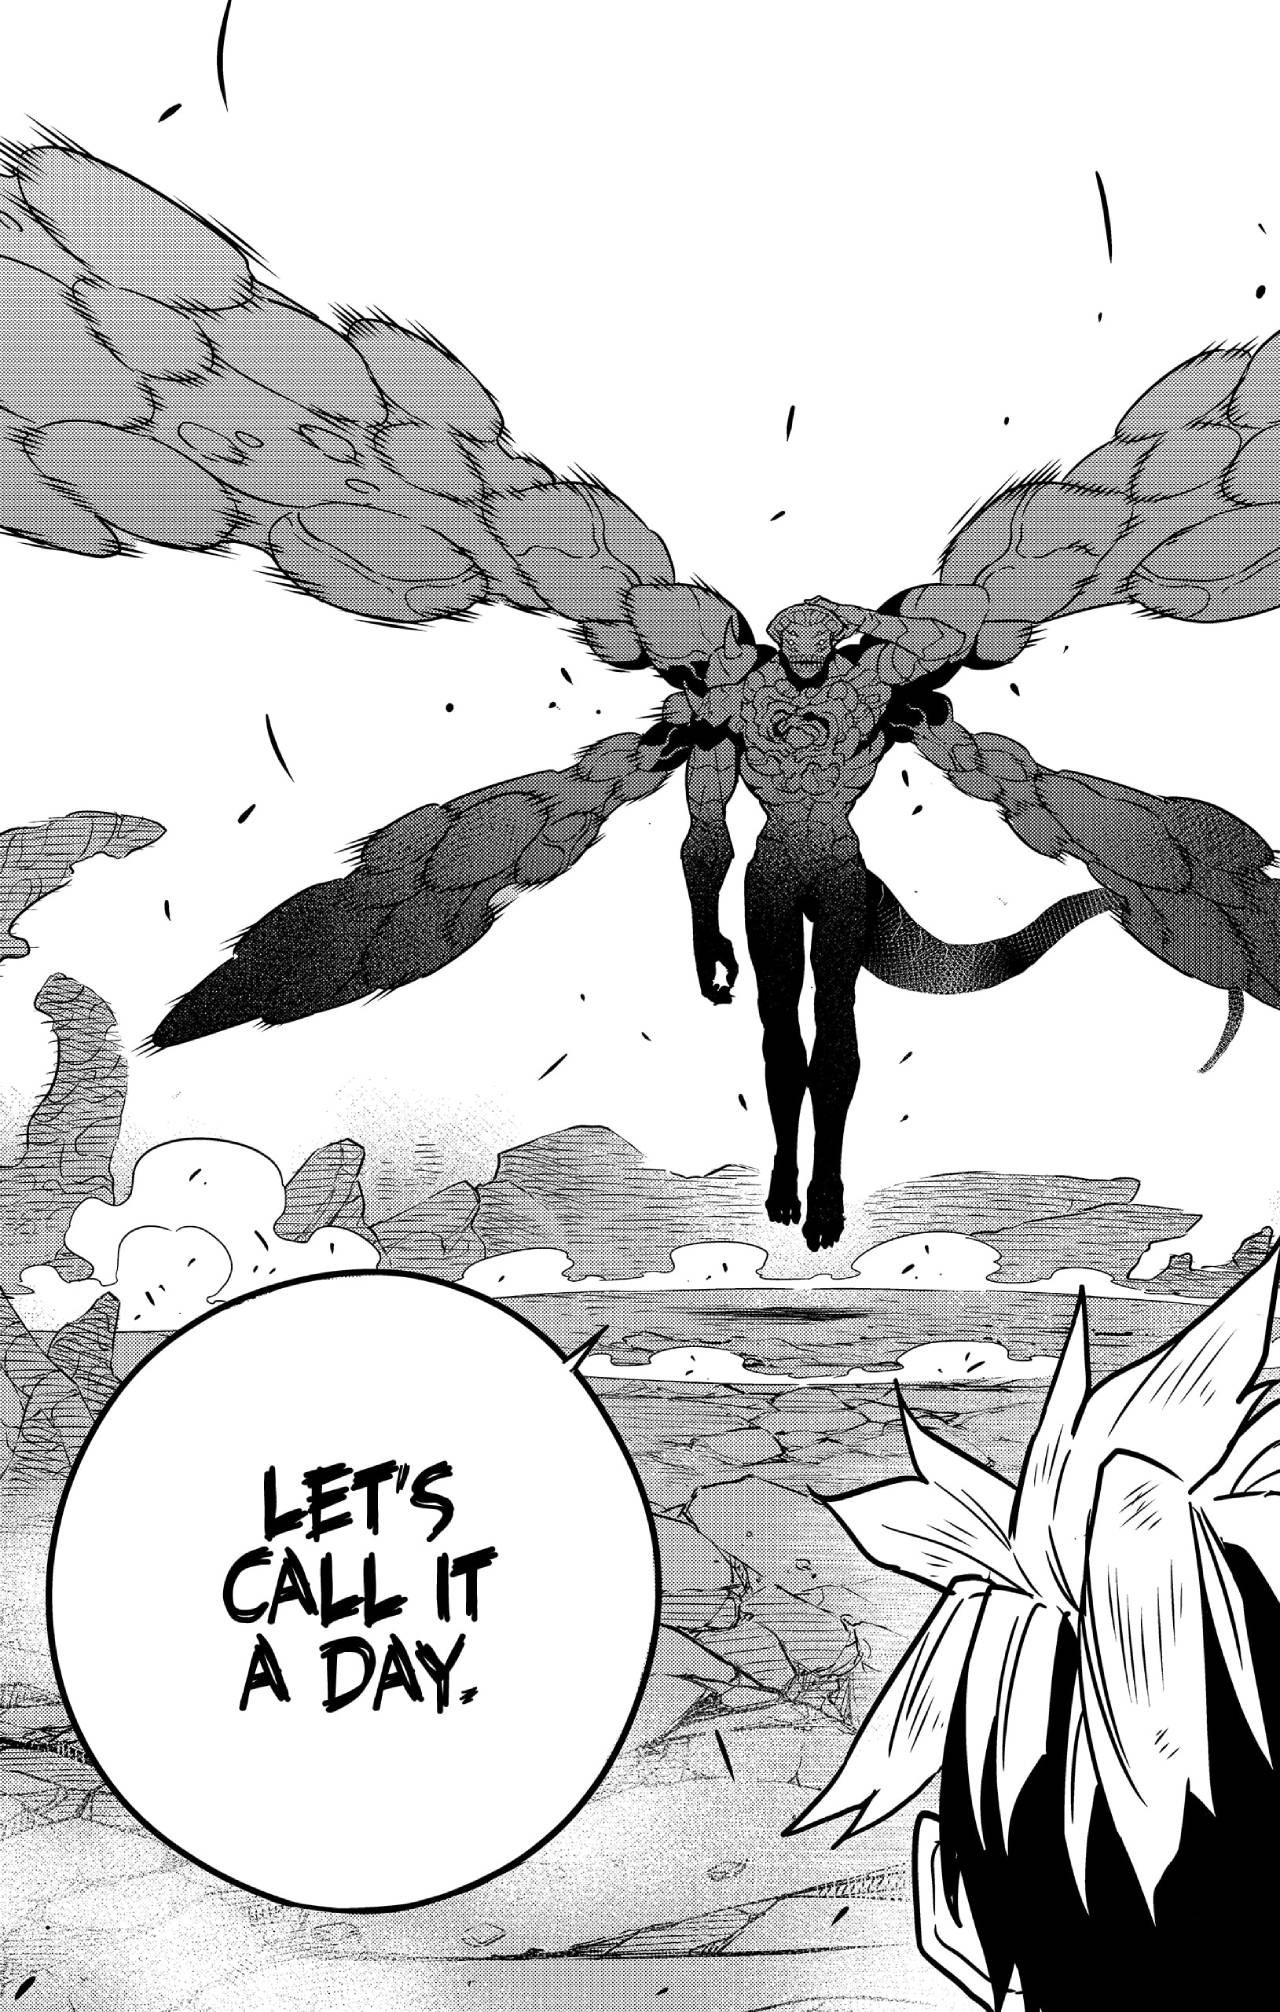 Kaiju no 8 Chapter 52, monster #8 chapter 52